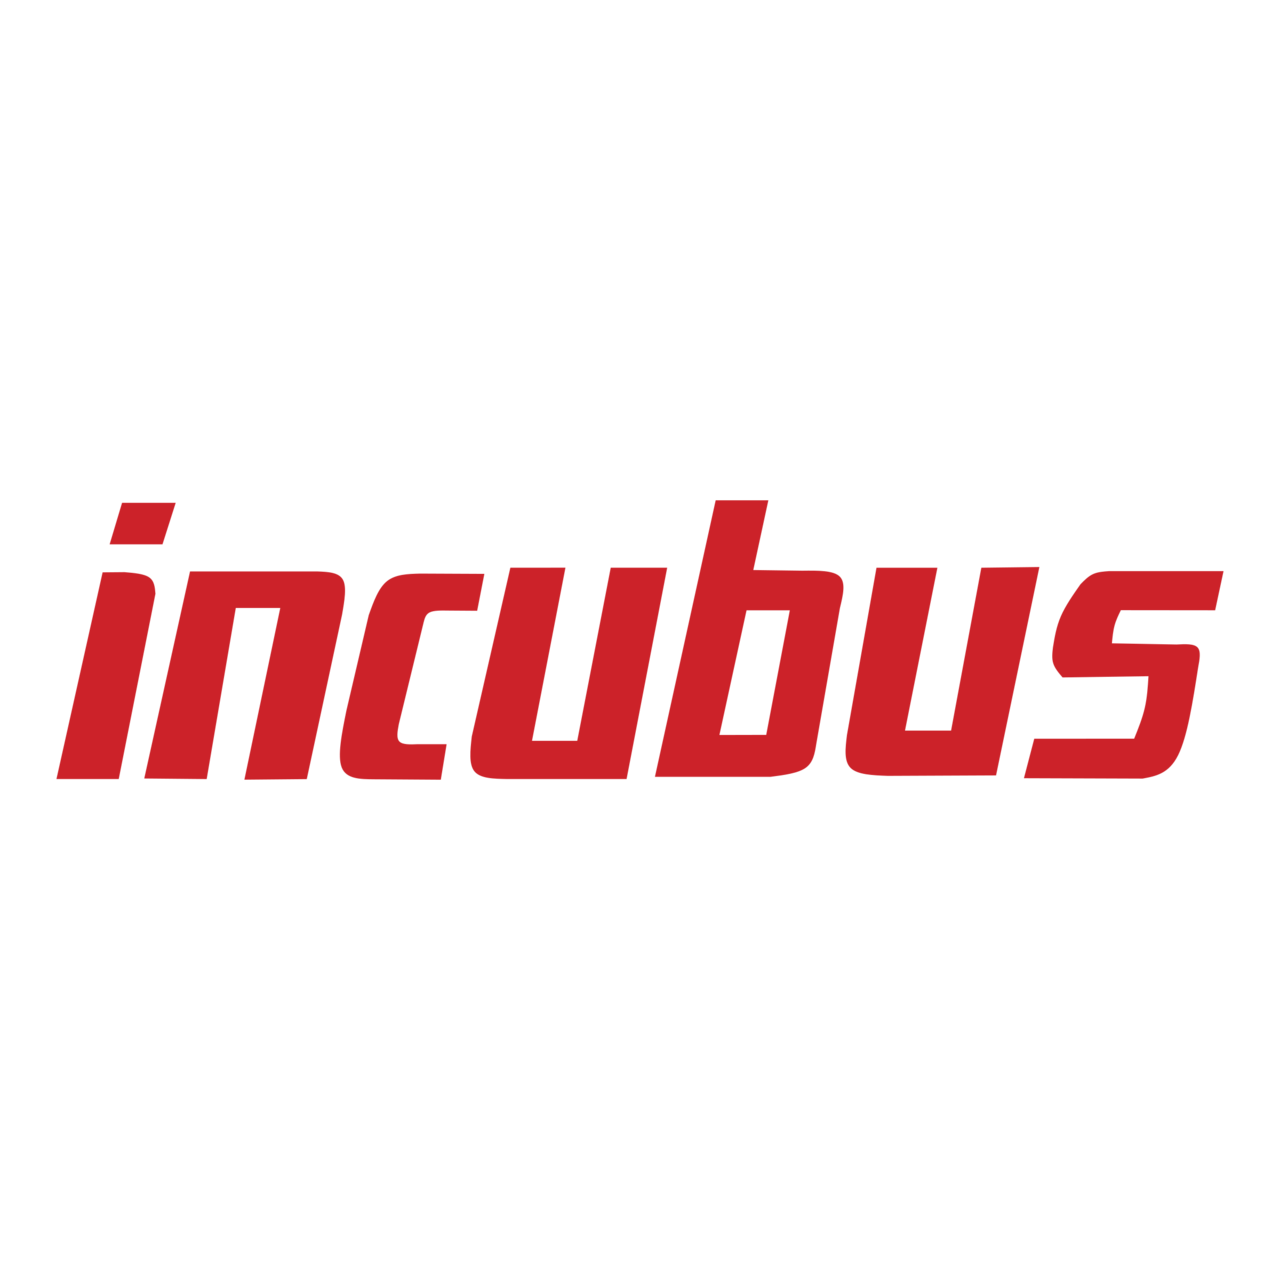 Download Incubus Logo PNG and Vector (PDF, SVG, Ai, EPS) Free